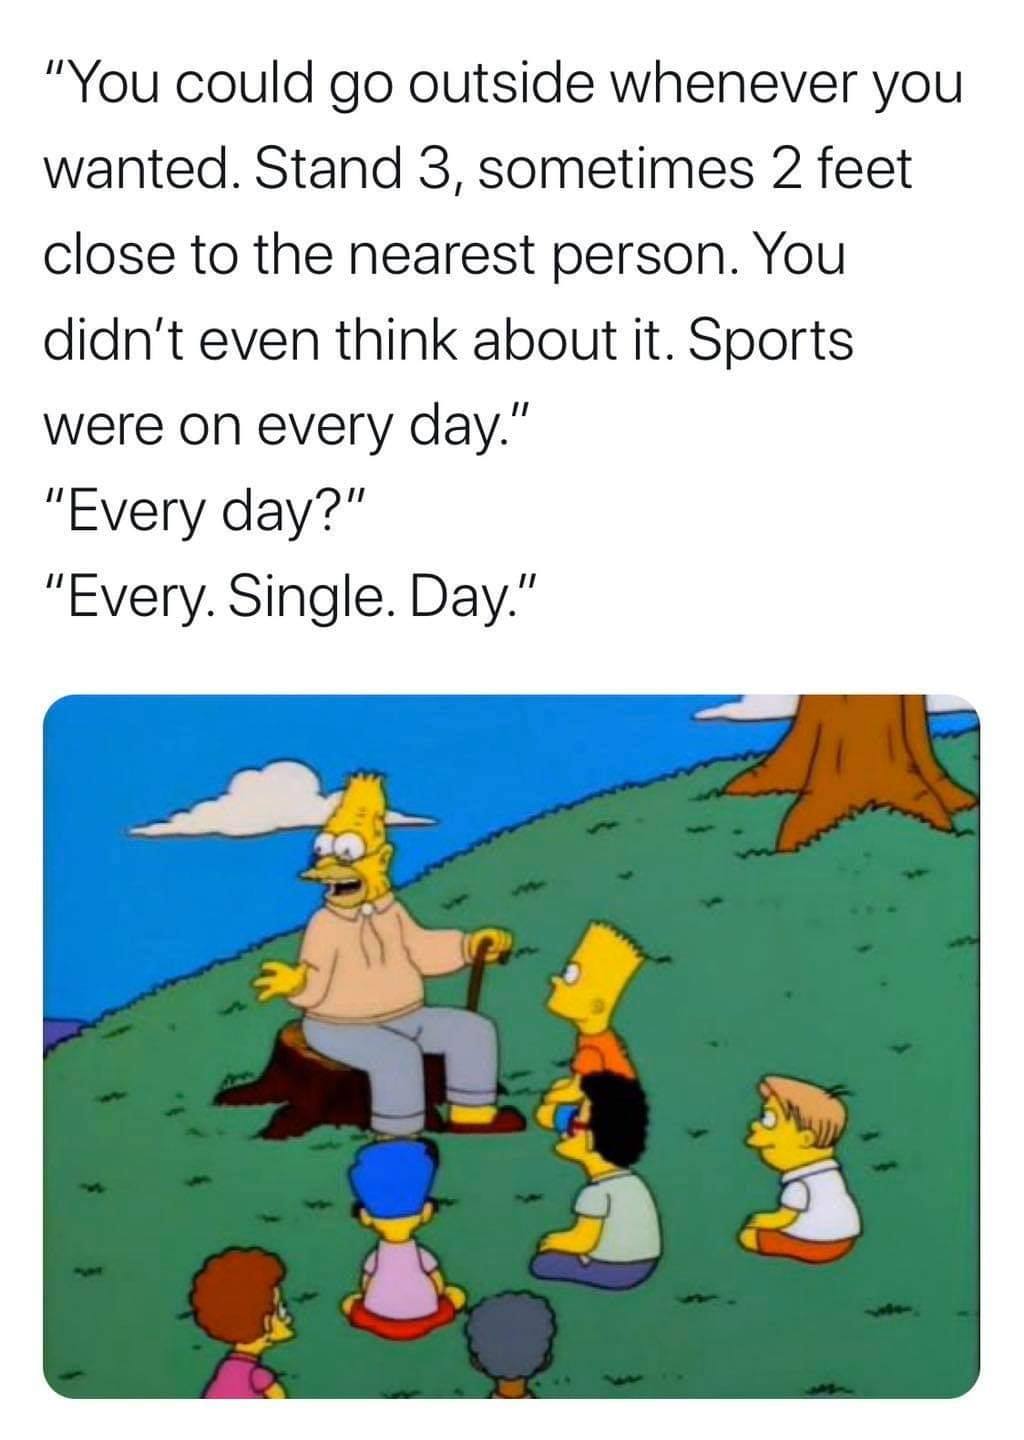 funny memes - hilarious memes - simpsons meme - "You could go outside whenever you wanted. Stand 3, sometimes 2 feet close to the nearest person. You didn't even think about it. Sports were on every day." "Every day?" "Every. Single. Day."